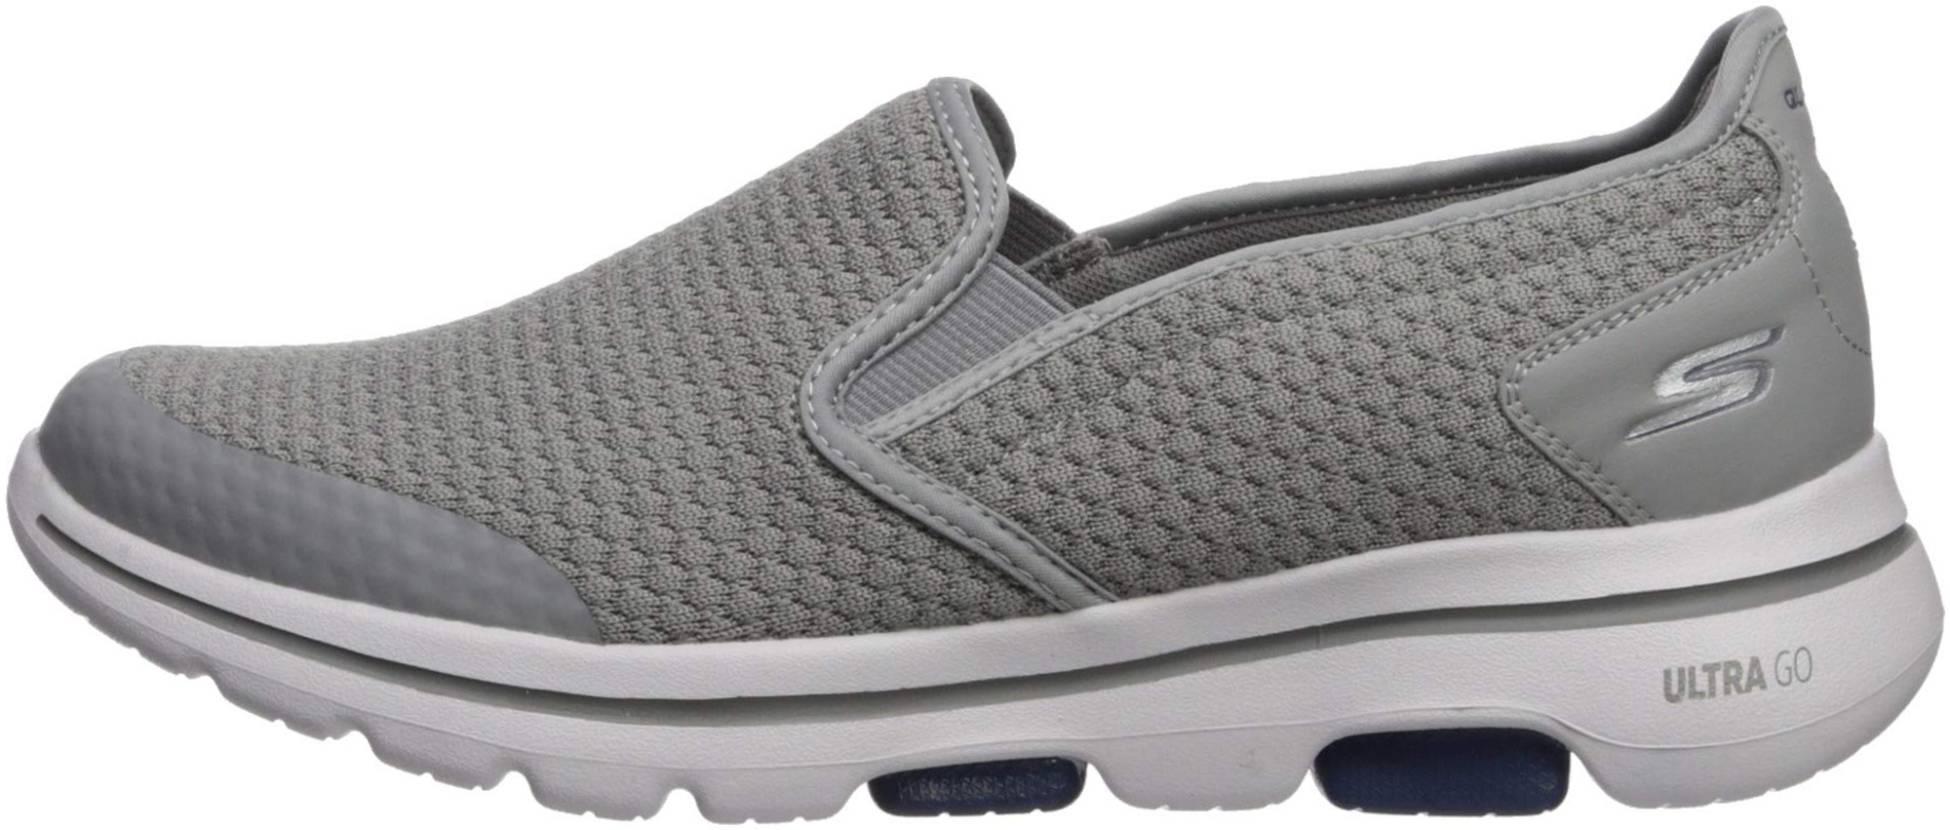 Save 32% on Skechers Walking Shoes (28 